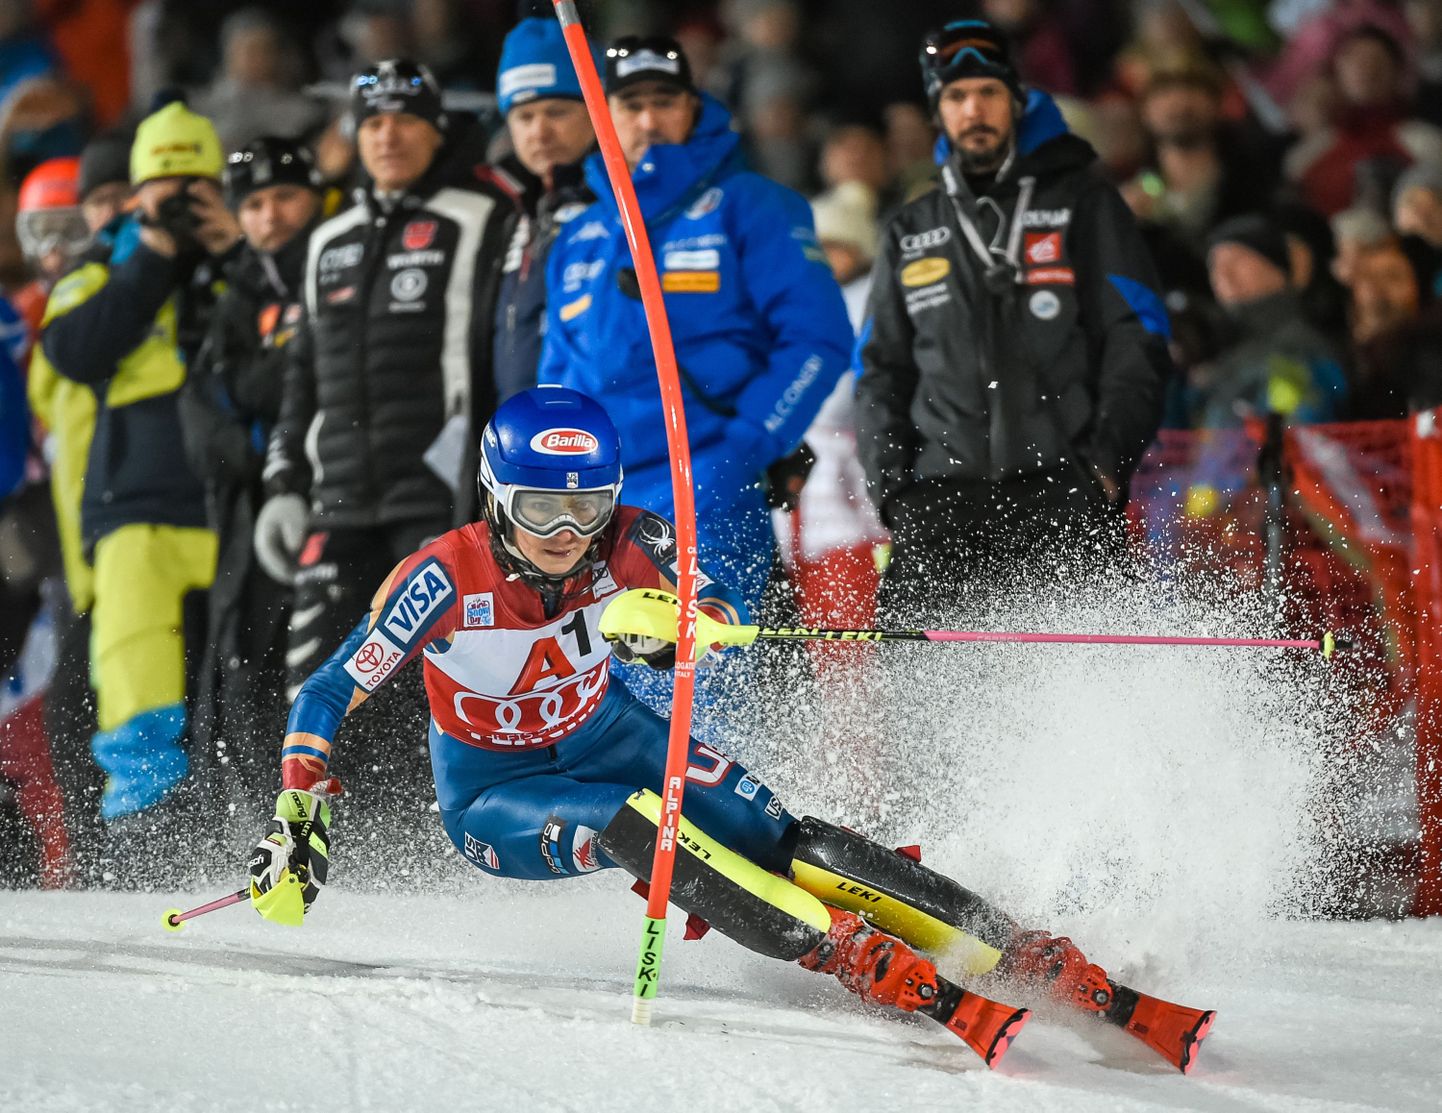 Mikaela Shiffrin of USA competes during first run of the FIS World Cup Ladies night Slalom race in Flachau,Austria on January 9, 2018.  / AFP PHOTO / APA AND EXPA / Erich SPIESS / Austria OUT